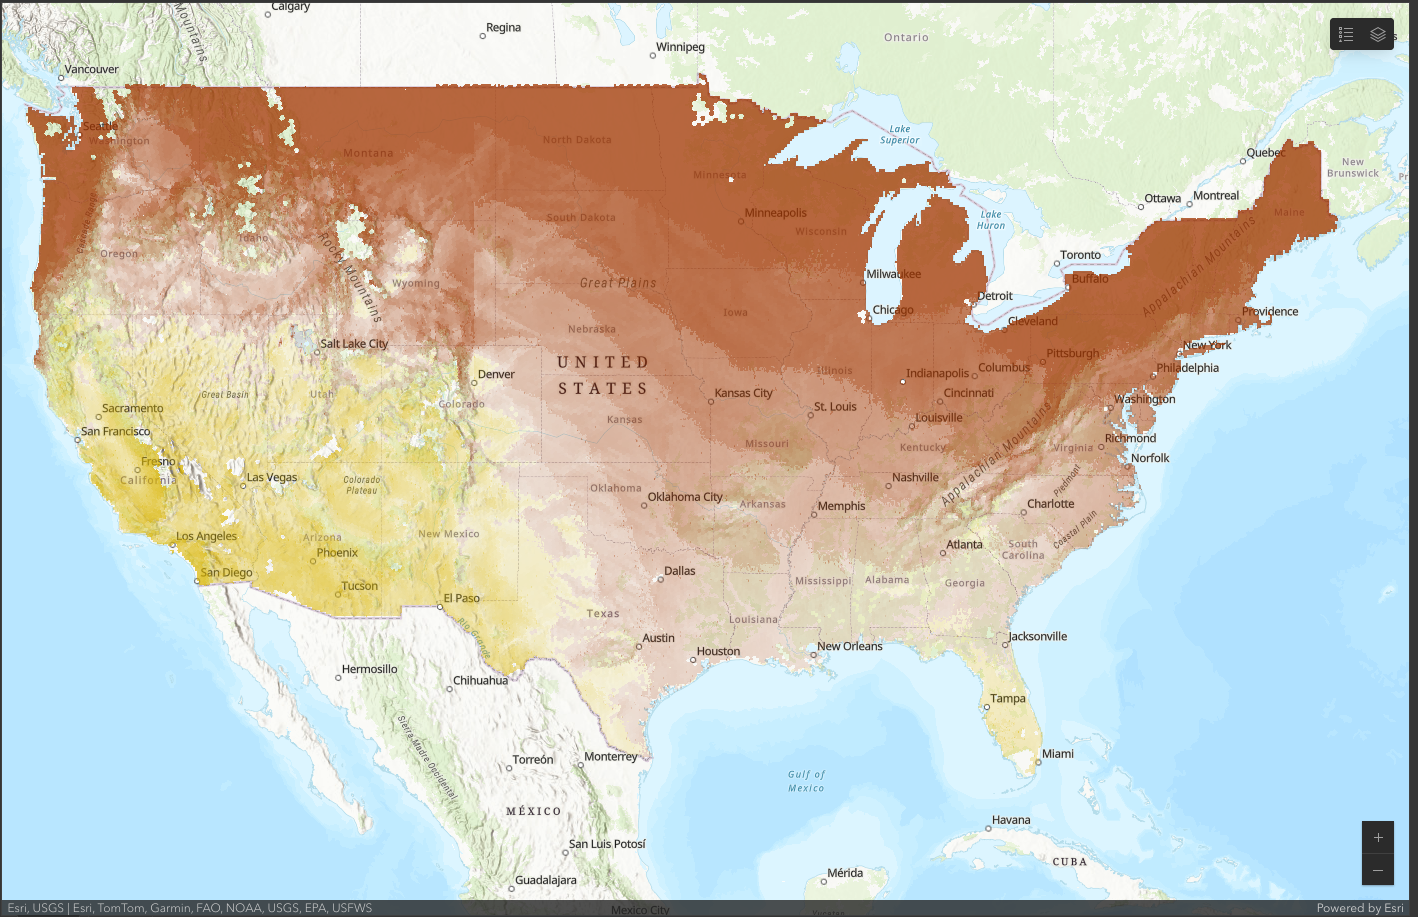 Ref image for Geography of Alternative Energy project